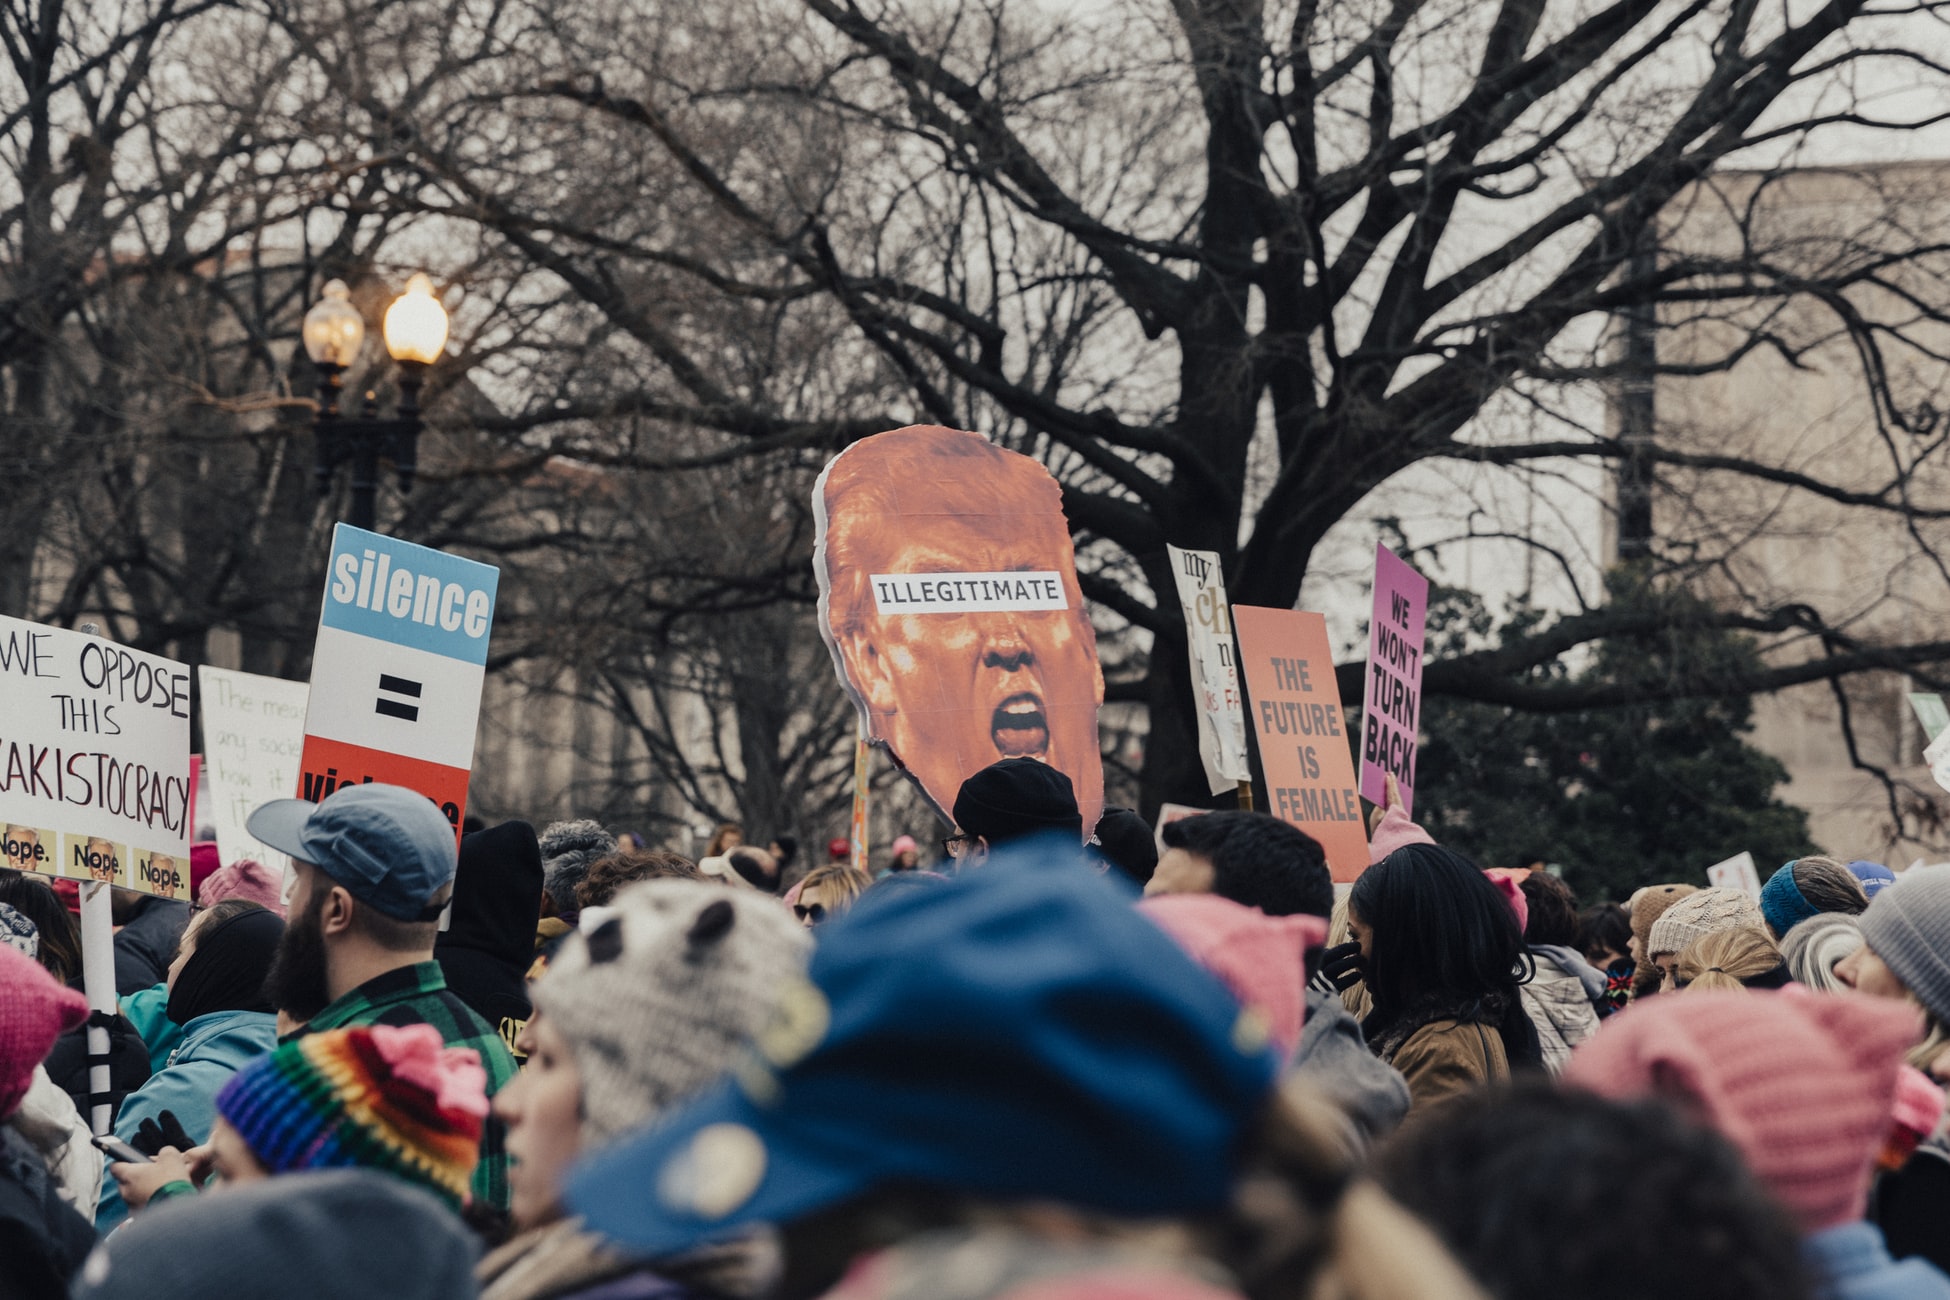 Protests erupted across America after Donald Trump was first elected in 2016. Image Credit: Unsplash/Roya Ann Miller